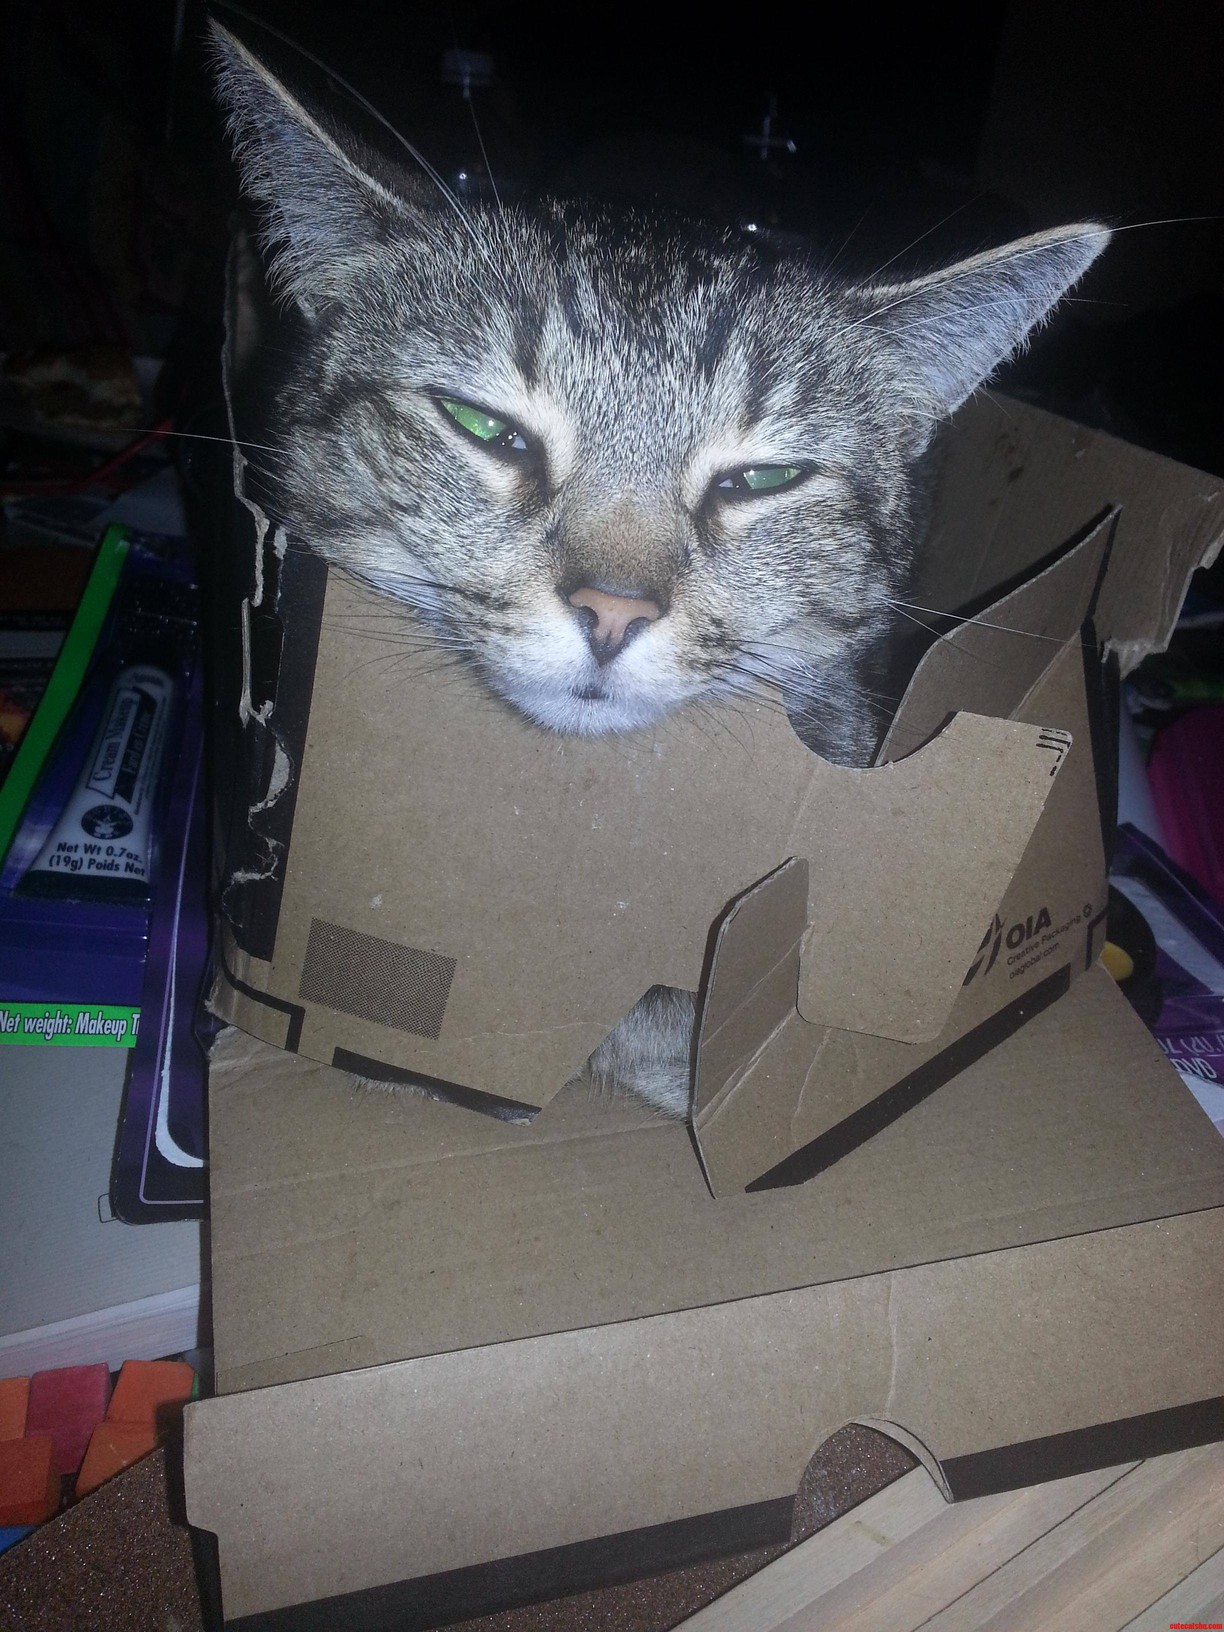 She Looked So Comfortable In Her Cat Trap And Then I Came Along And Took A Picture.